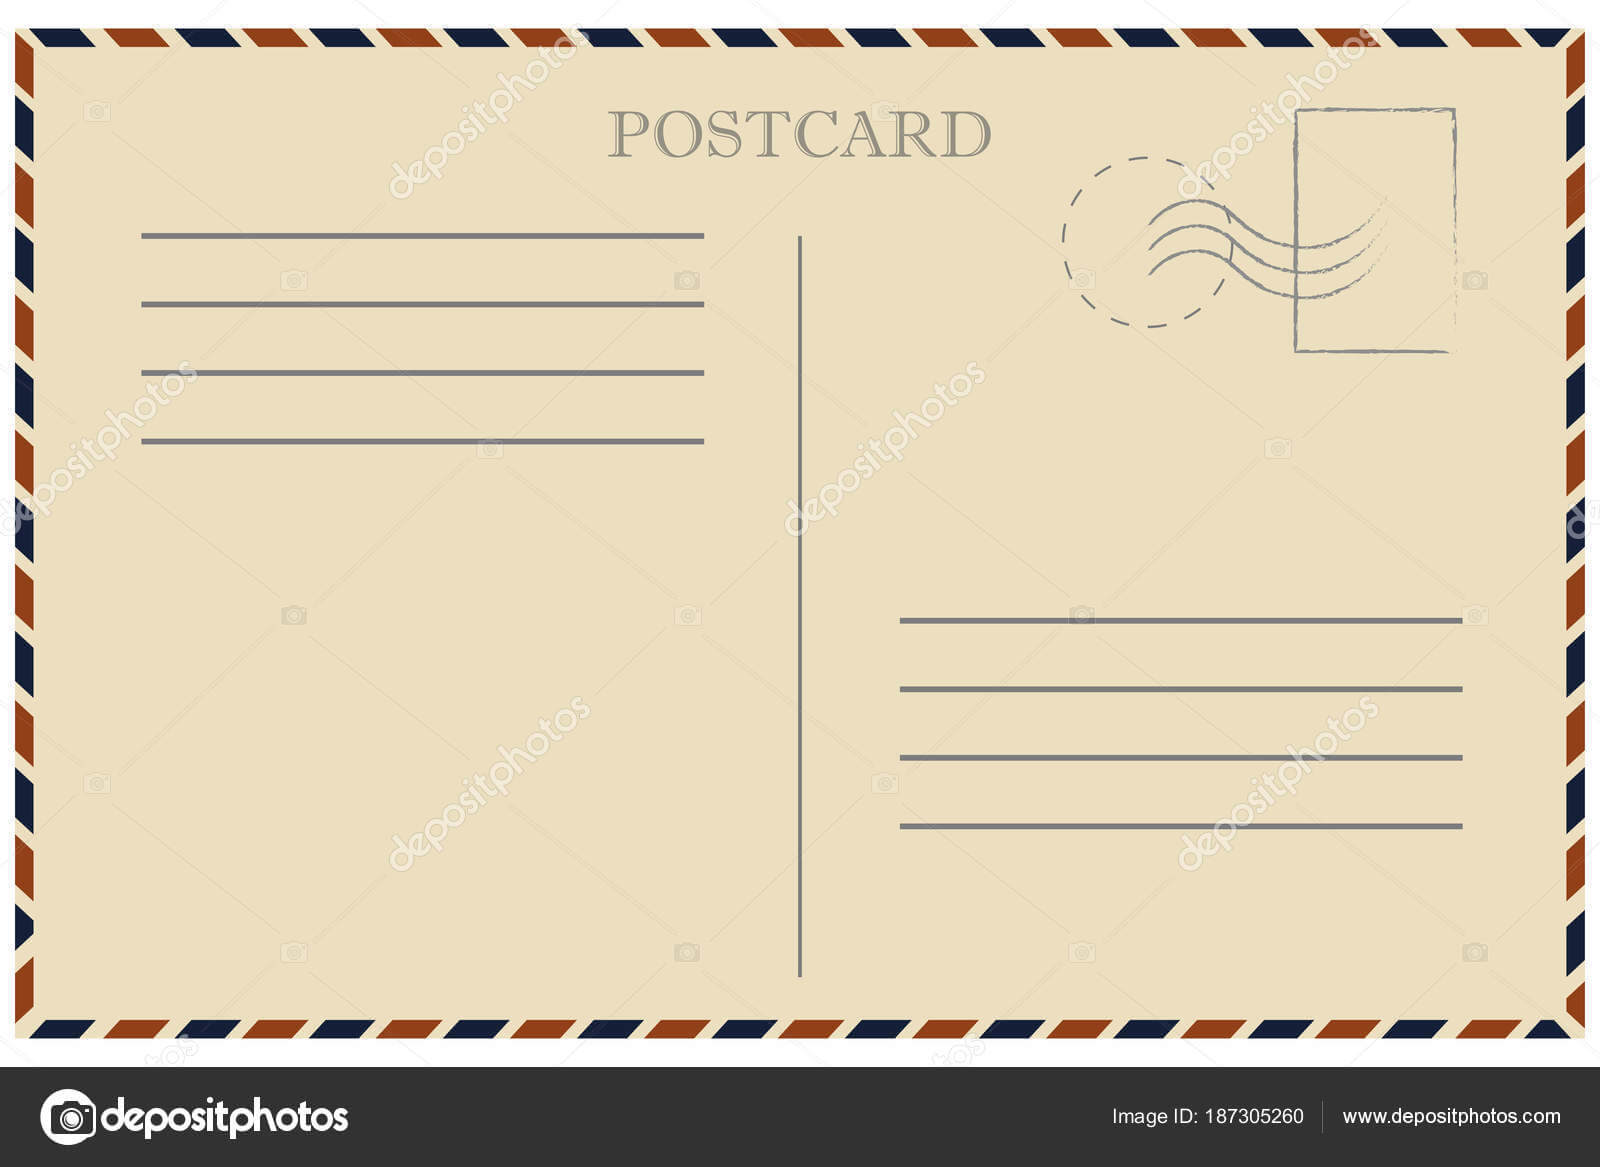 Vintage Postcard. Old Template. Retro Airmail Envelope With Intended For Airmail Postcard Template